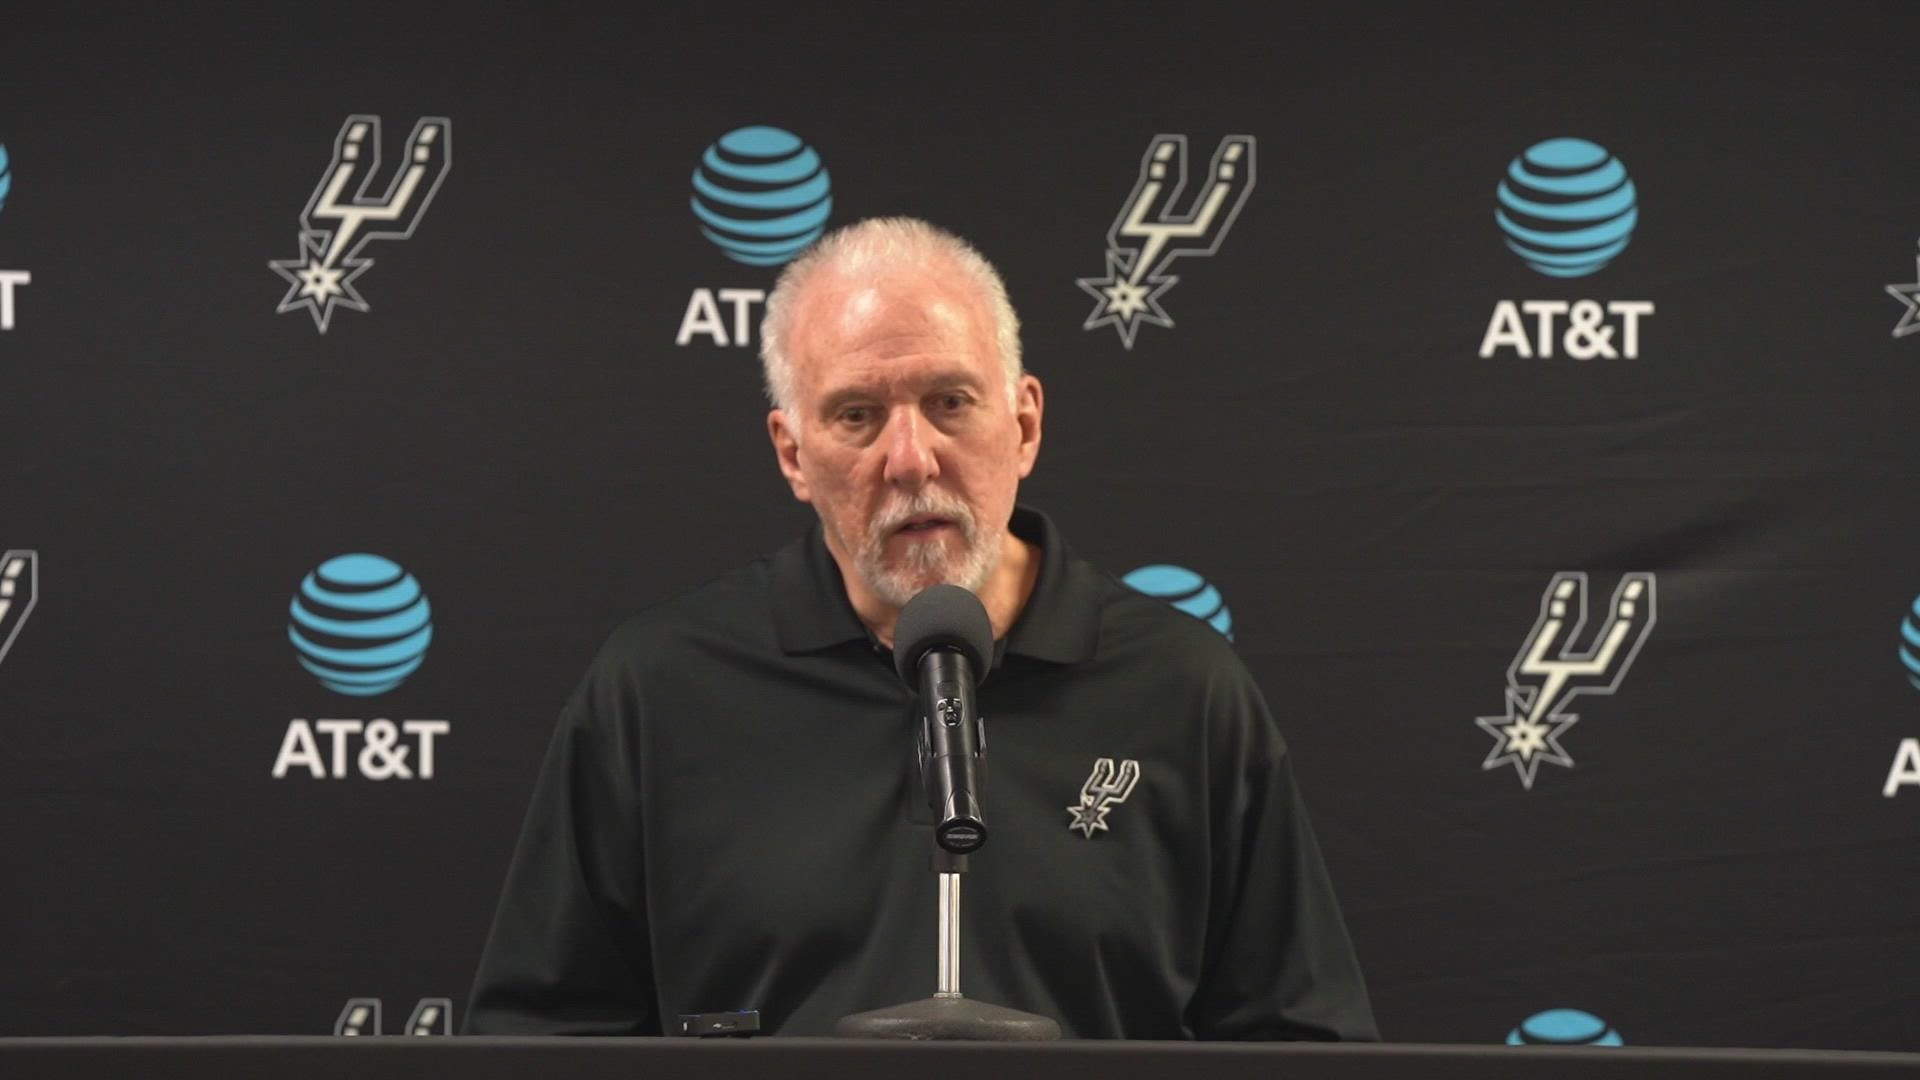 "As usual, they don’t give in. They keep working," Pop said. "The big problem in some of our games is rebounding. We gave up 28 second-chance points."